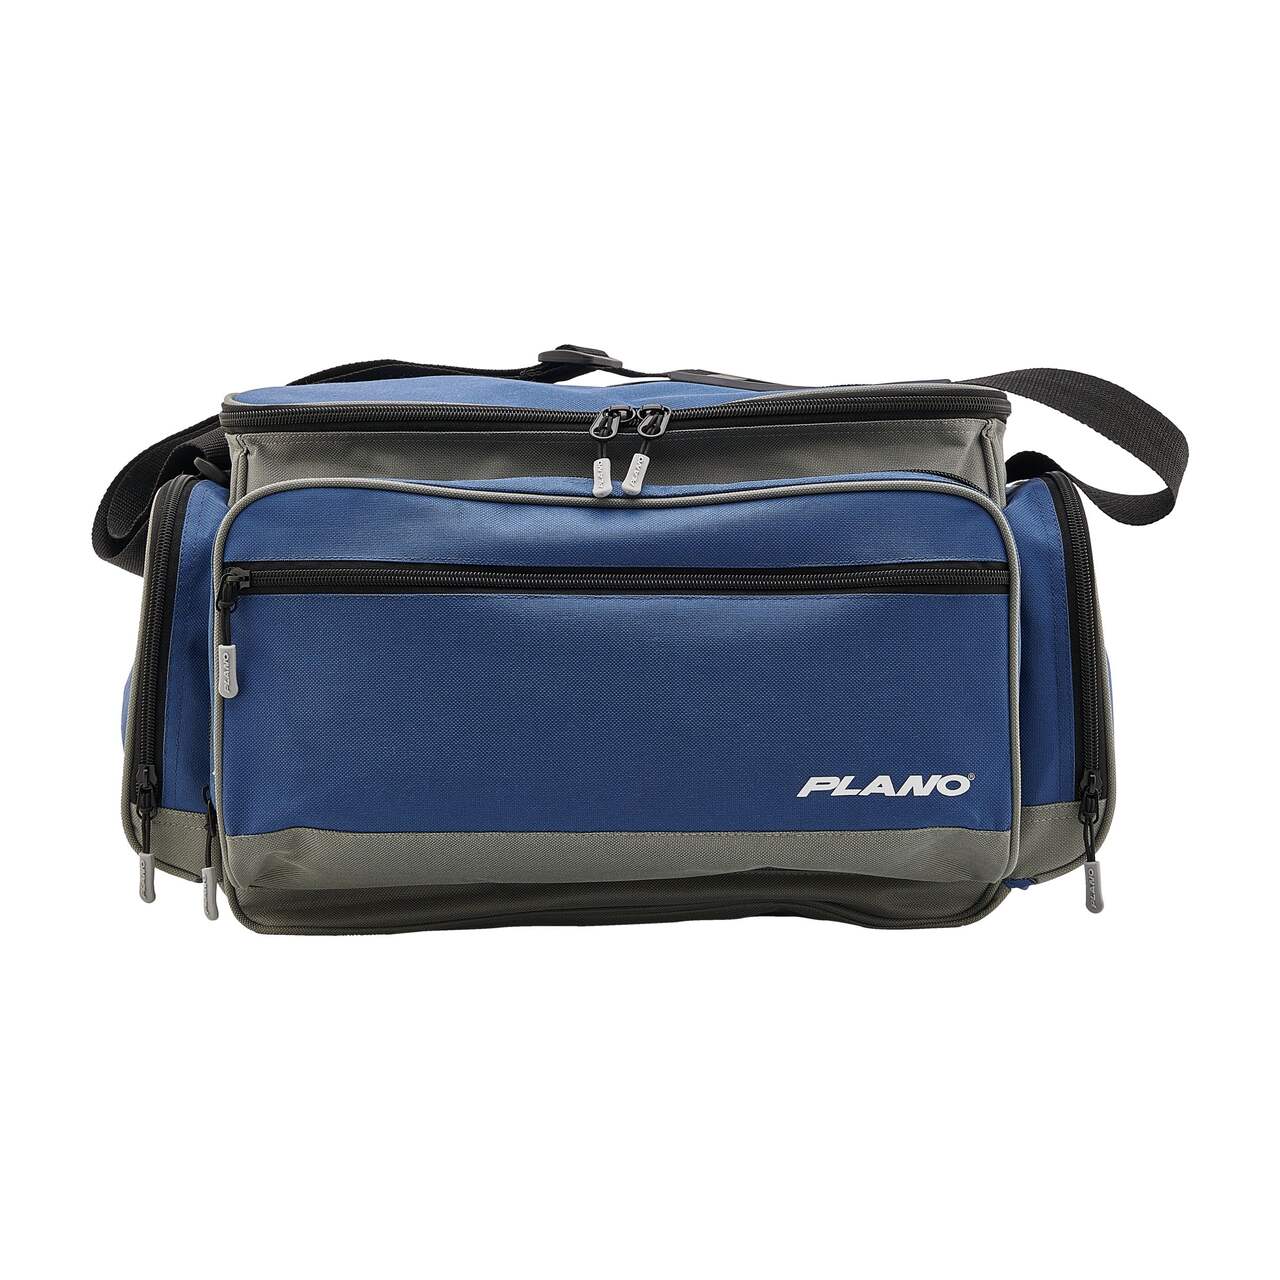 Plano Synergy Guide Series 3700 XL Tackle Bag, multicolor, one